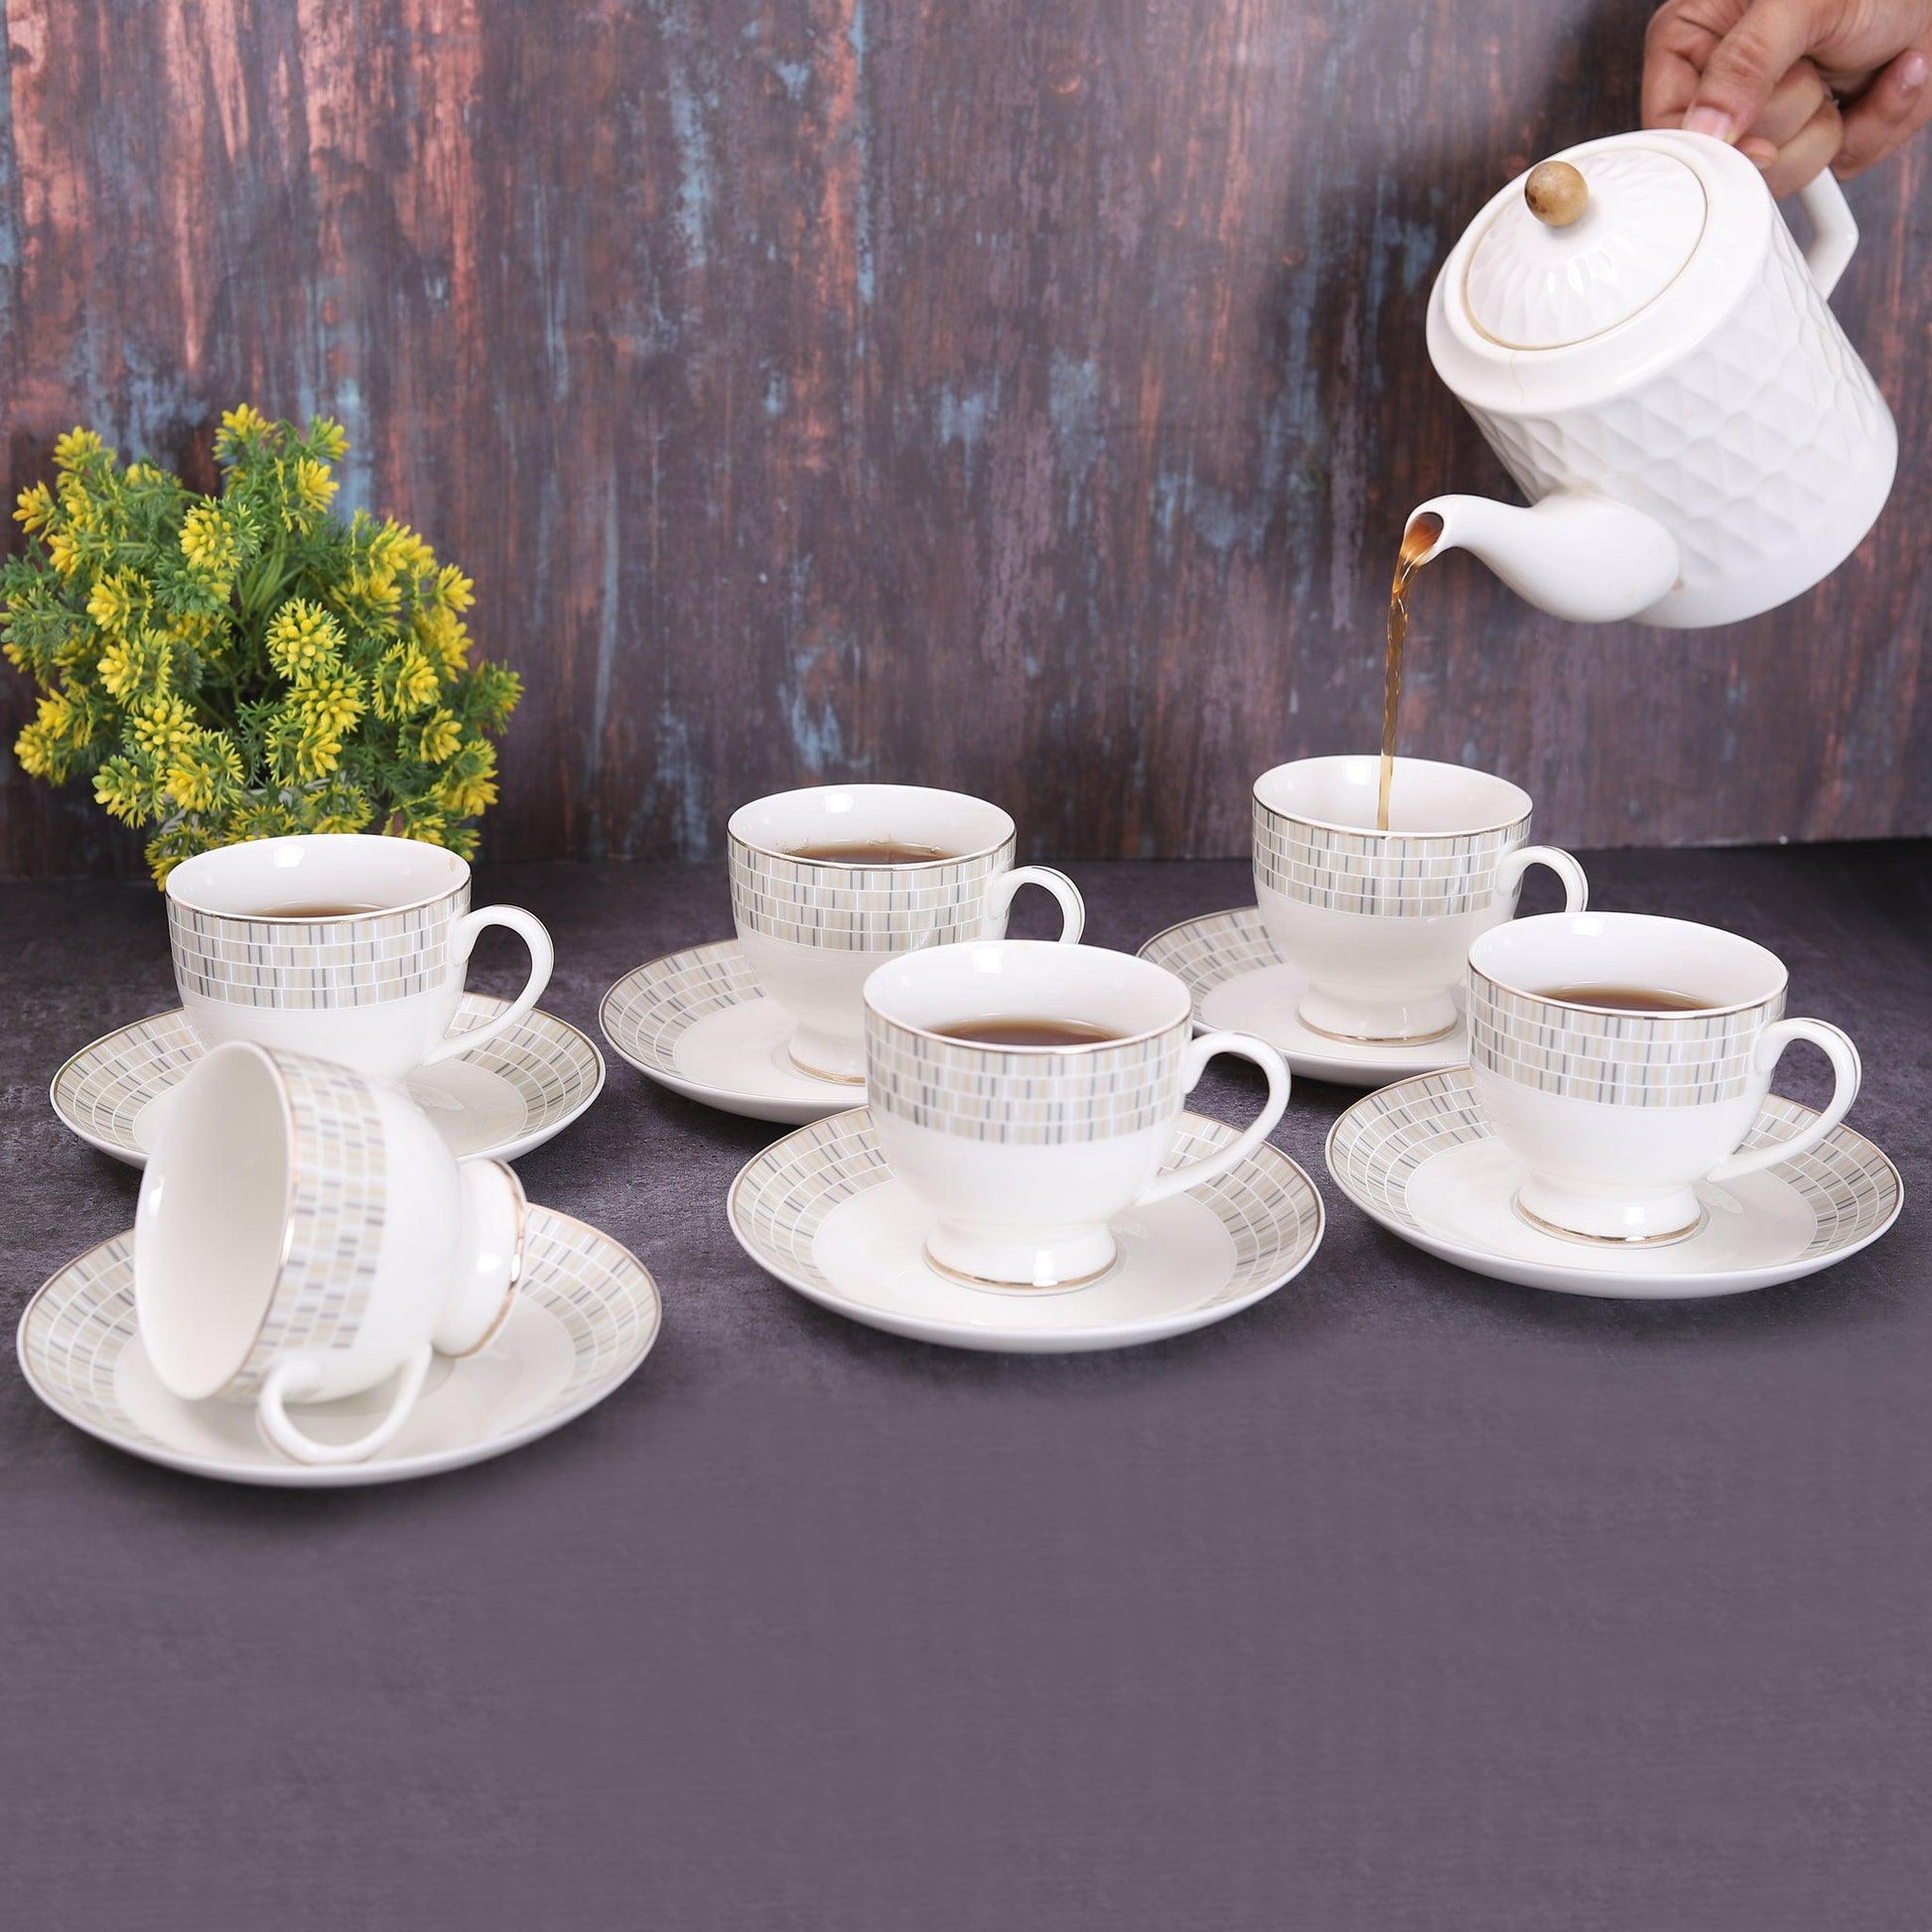 Japanese 24ct Gold Platted Luxury Cups and Saucers Set in Era of Bricks Design (Set of 6) - Amora Crockery